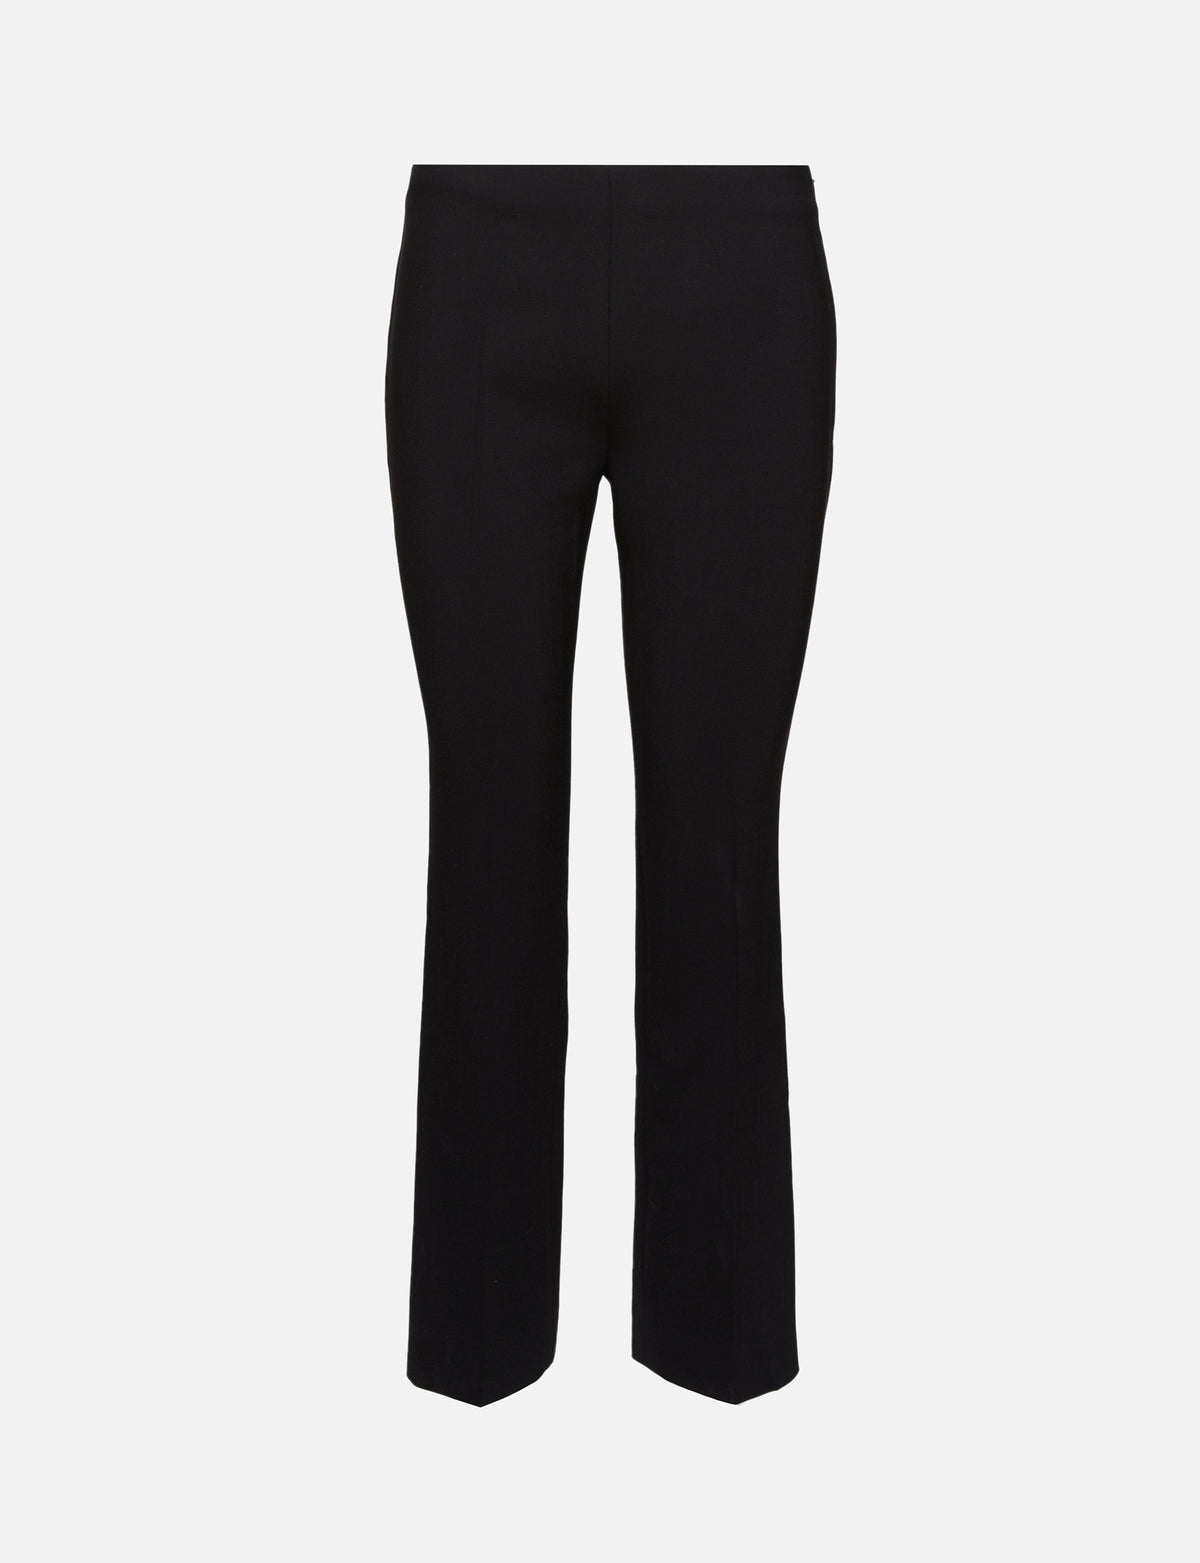 view 1 - Stretch Double Wool Pant